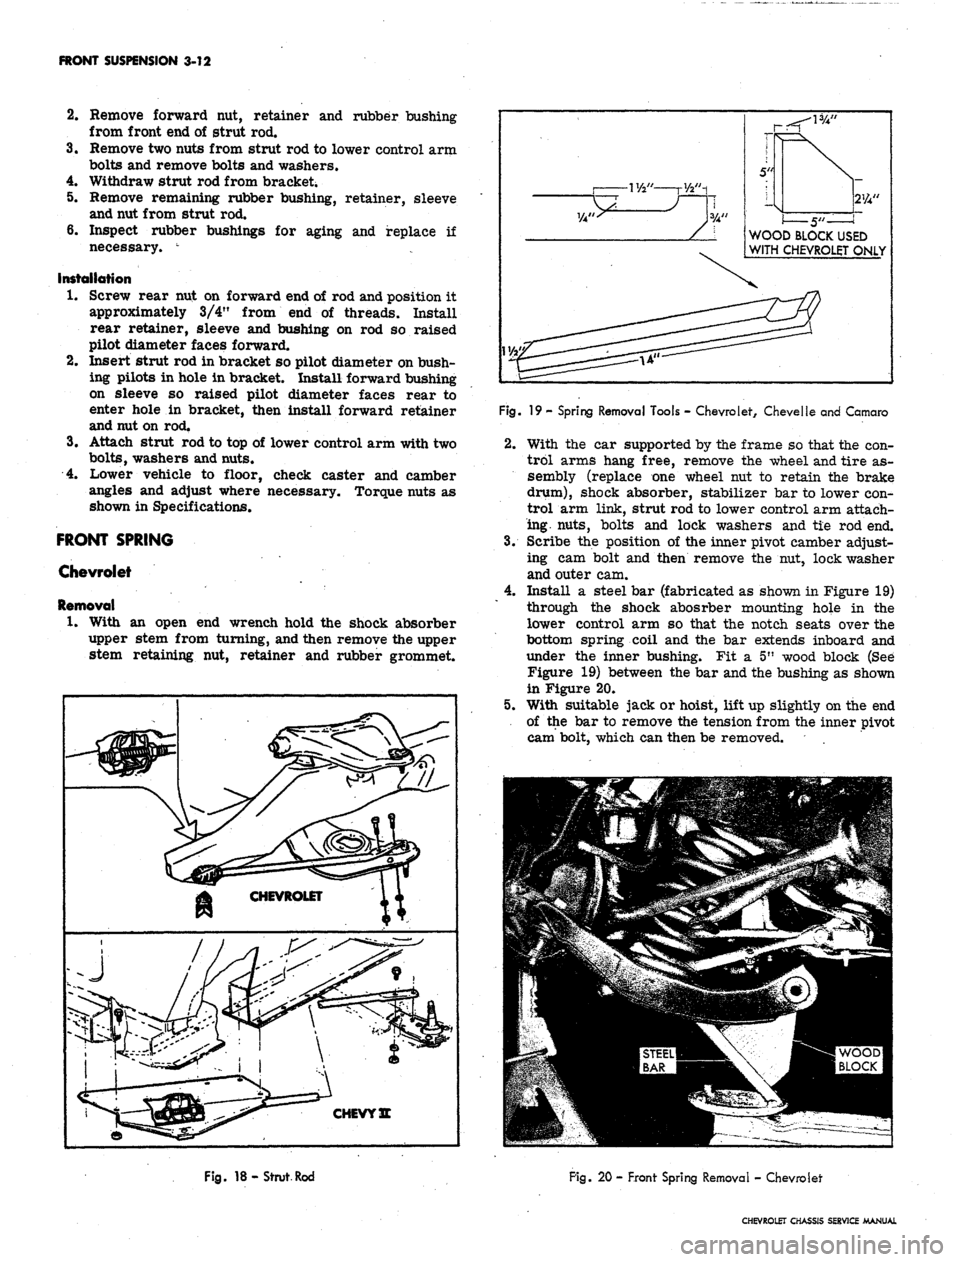 CHEVROLET CAMARO 1967 1.G Chassis User Guide 
FRONT SUSPENSION 3-12

2.
 Remove forward nut, retainer and rubber bushing

from front end of strut rod.

3.
 Remove two nuts from strut rod to lower control arm

bolts and remove bolts and washers.
